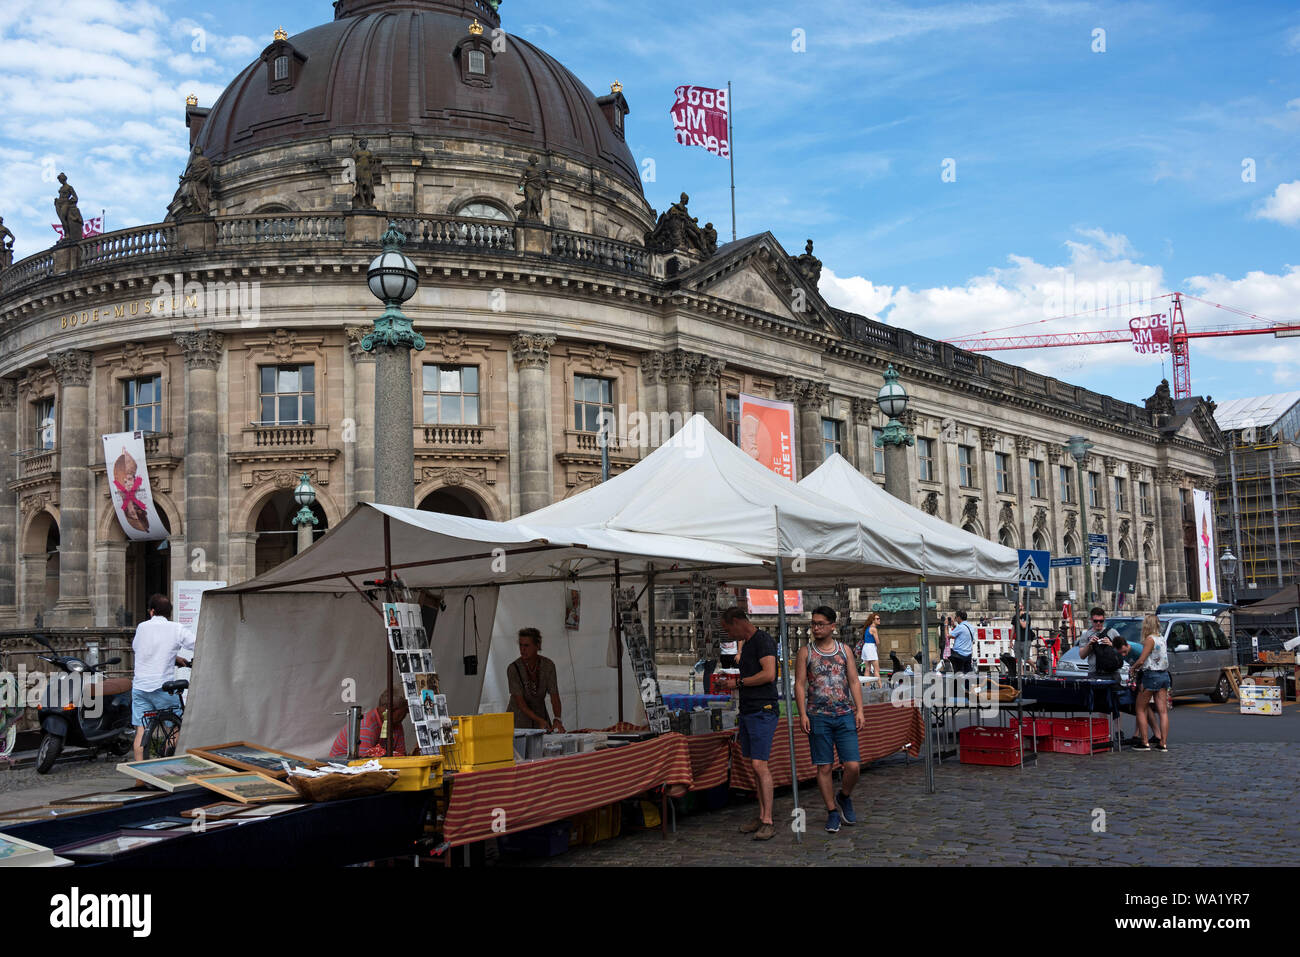 The Antique and Book Market near the Bode Museum, Berlin, Germany. Stock Photo